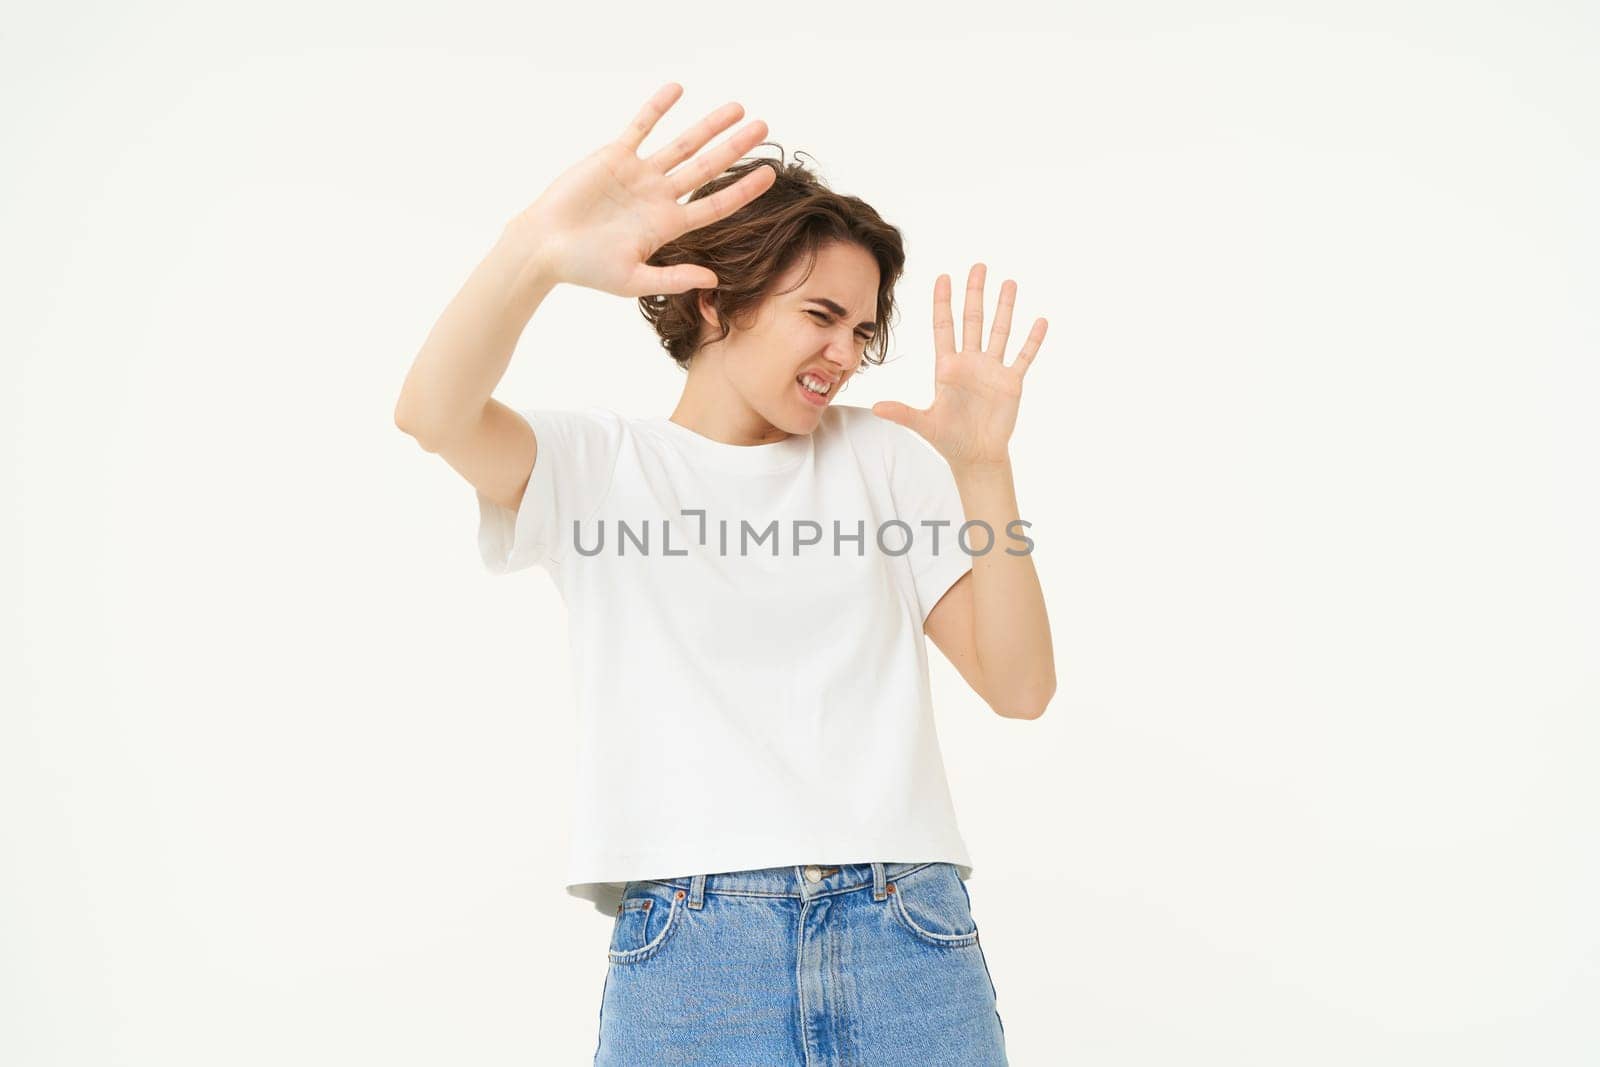 Portrait of woman raising hands in defense and blocking face from something, standing over white background.